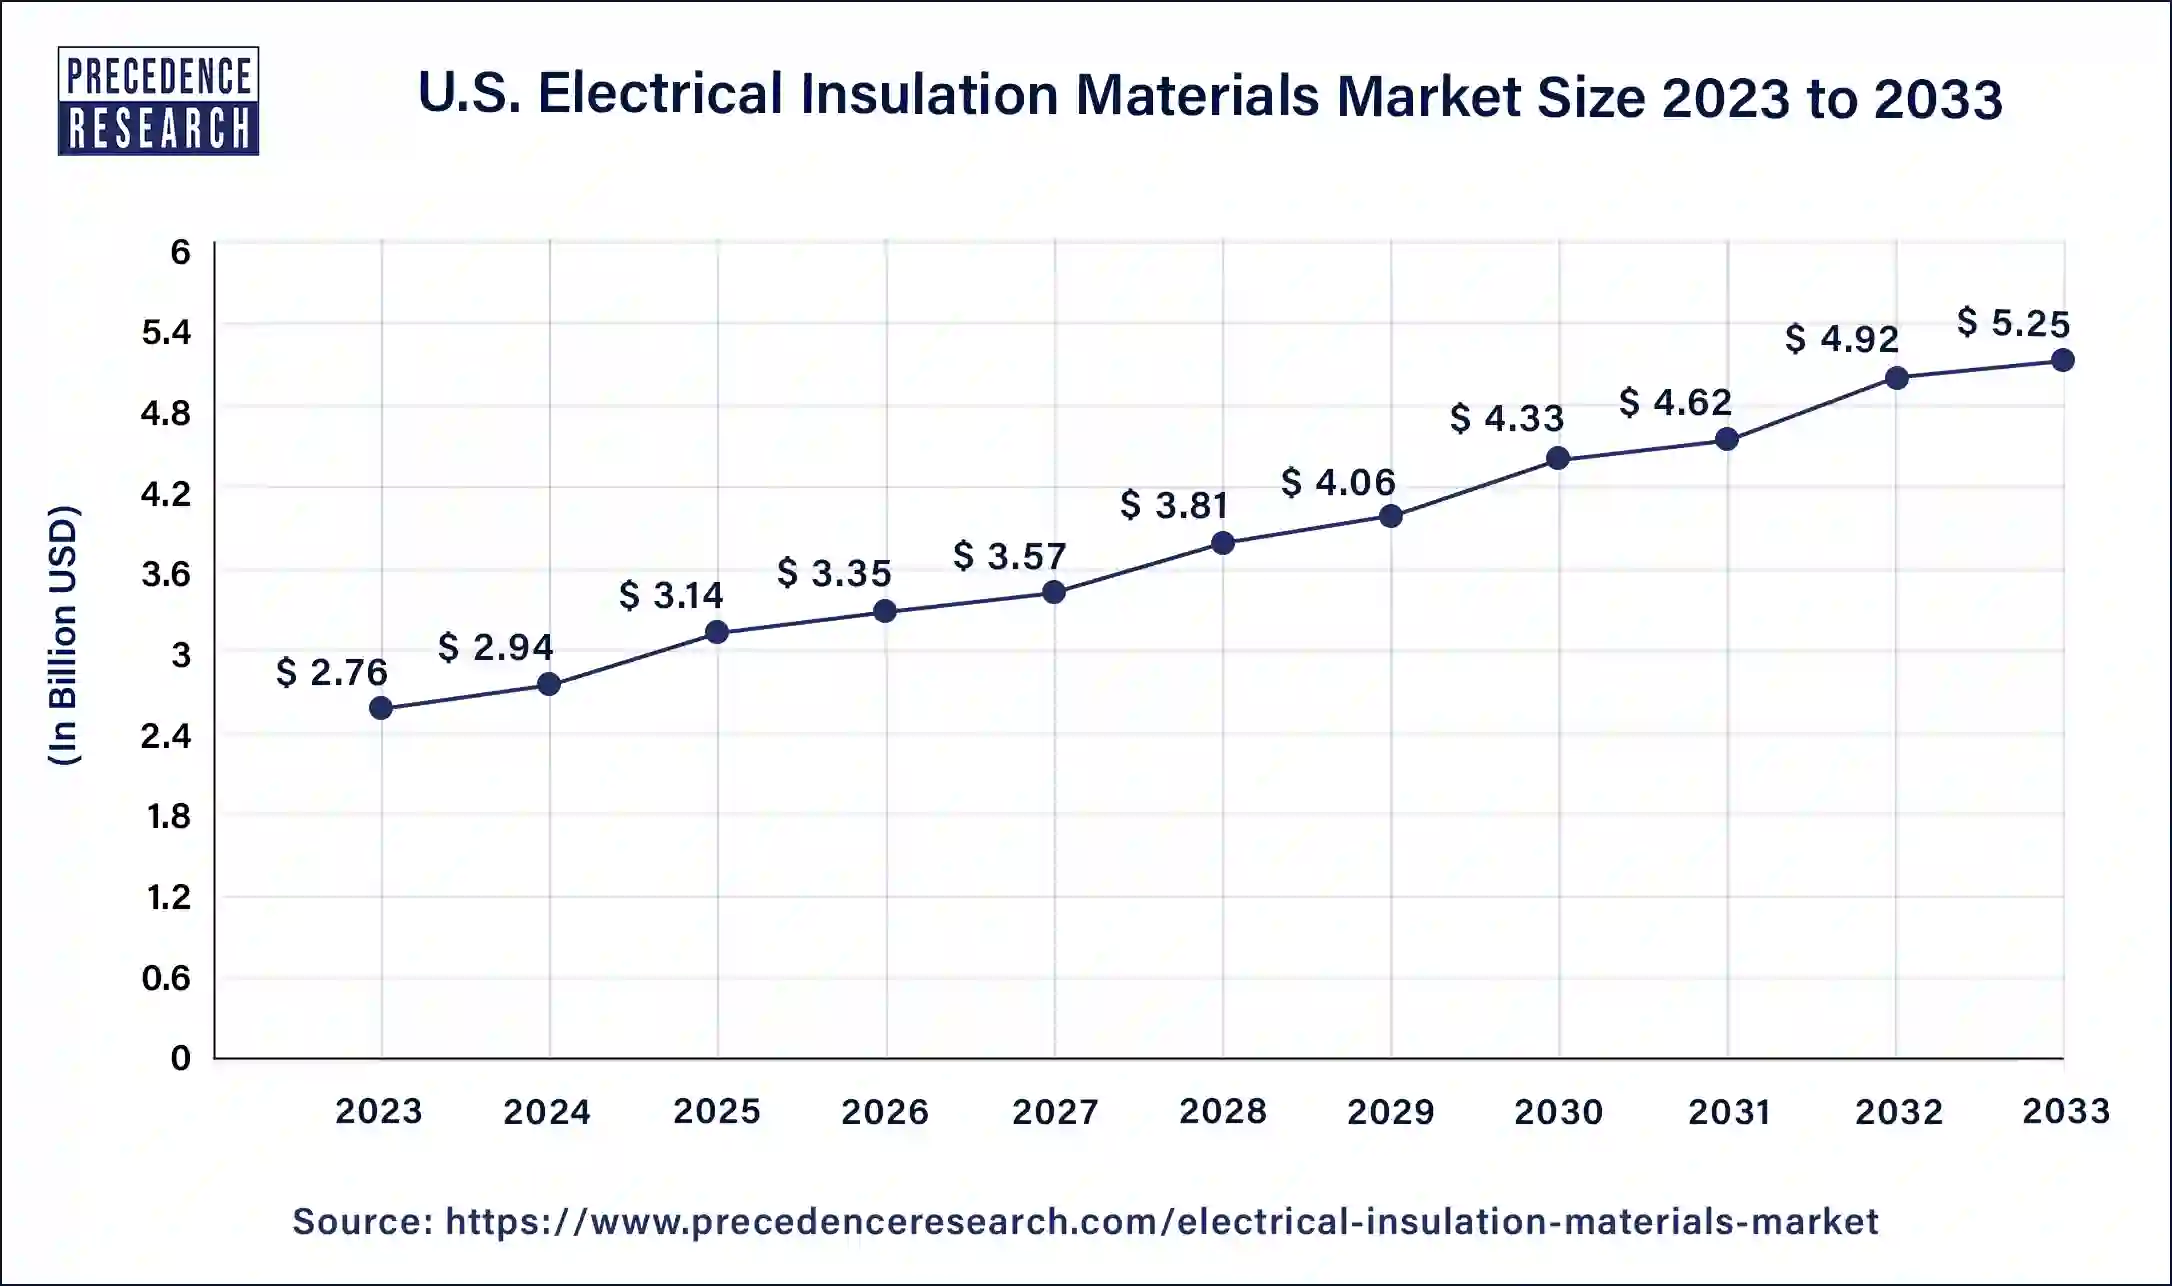 U.S. Electrical Insulation Materials Market Size 2024 to 2033